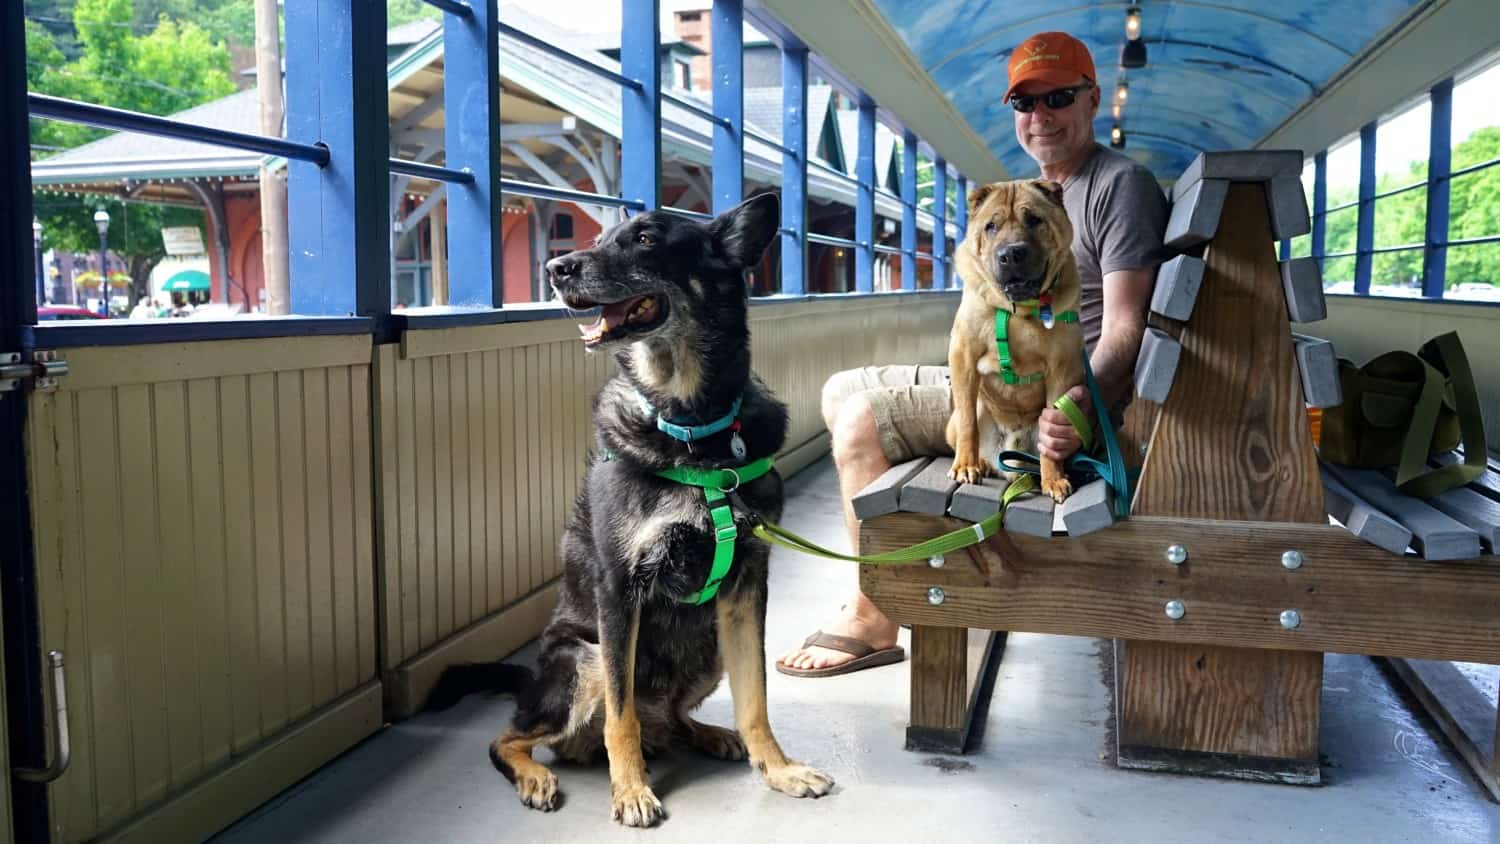 German Shepherd and Shar-pei dogs on a pet friendly scenic train ride in Jim Thorpe, PA - a great activity for traveling with elderly pets